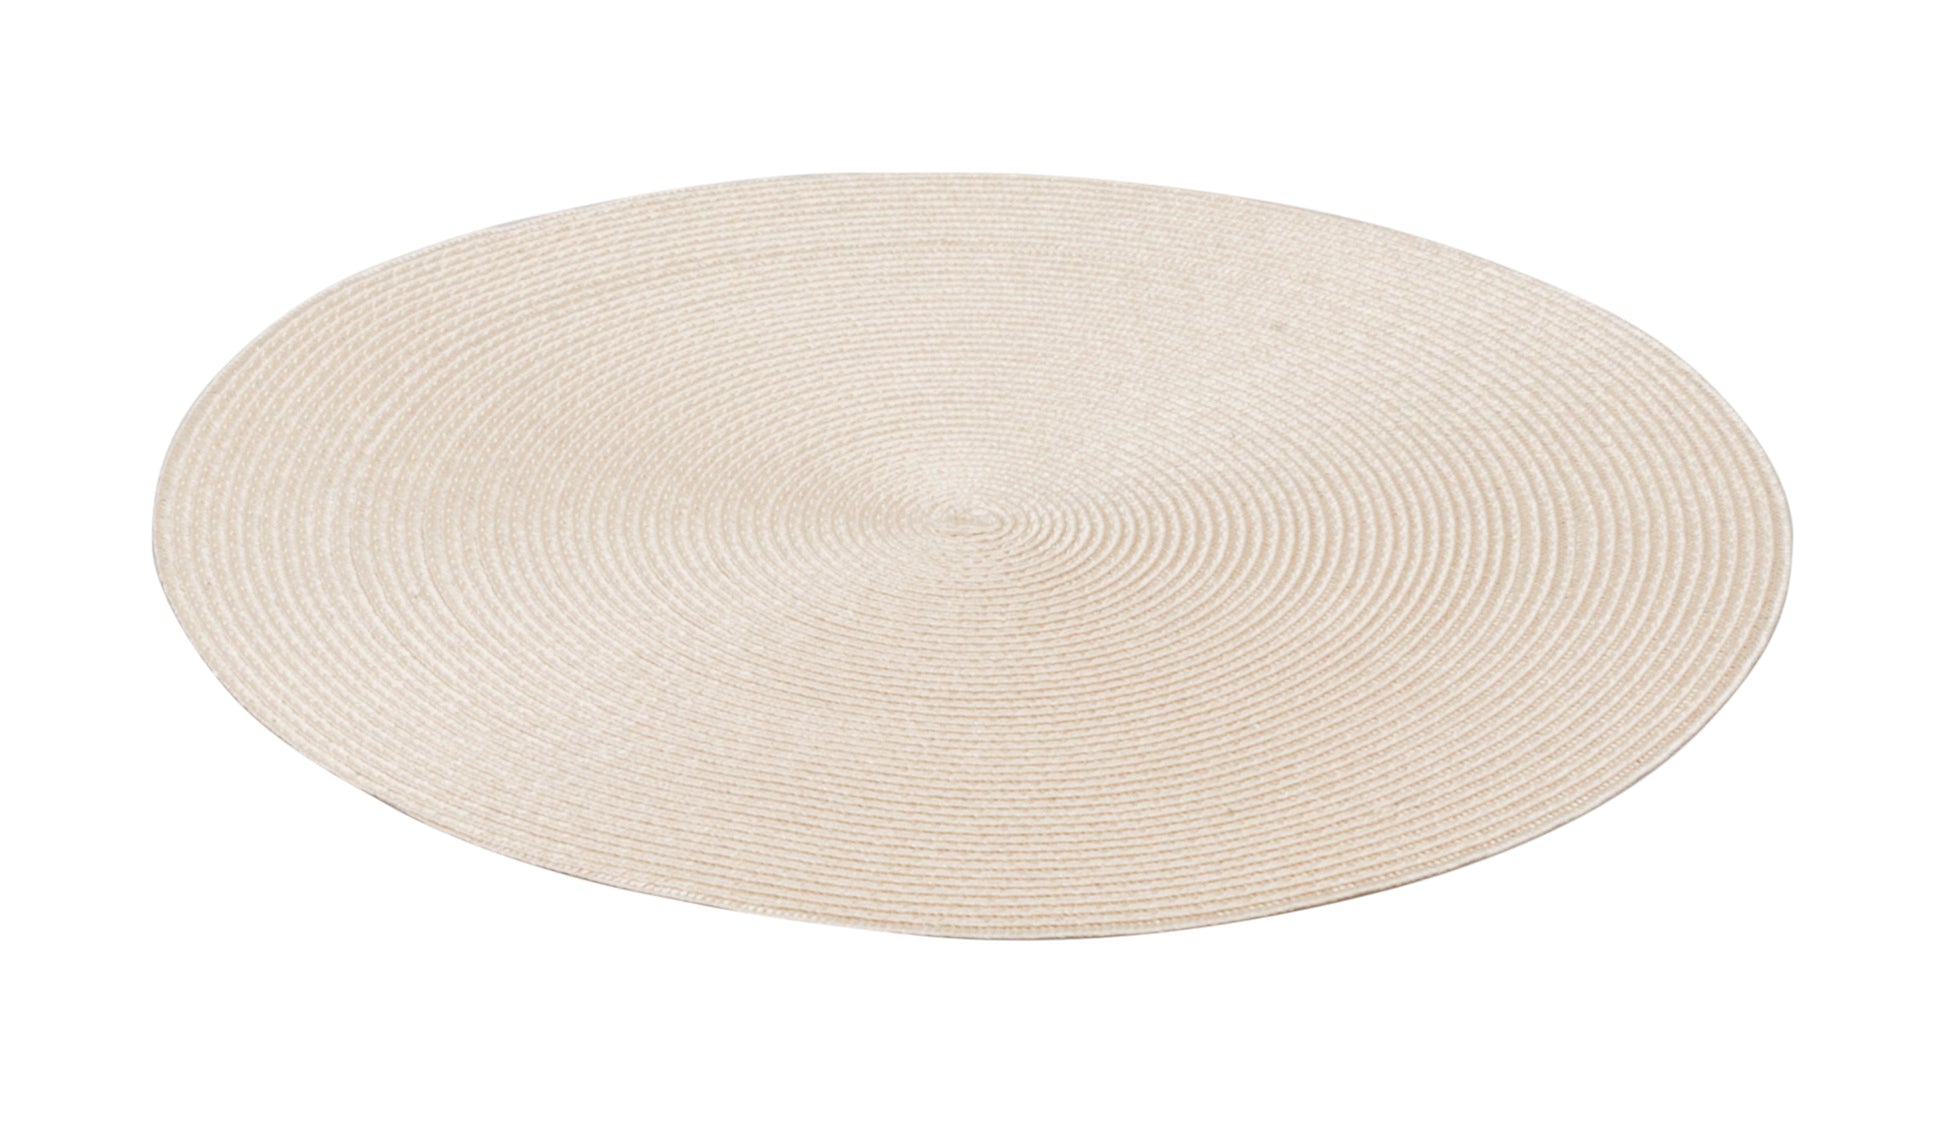 Trocadero Placemat by Pigment France | TechStraw placemats are sturdy and durable, ideal for year-round dining indoors or outdoors and require simple care: wipe clean with a sponge or cloth. | Tableware and Dining Accessories | 2Jour Concierge, your luxury lifestyle shop